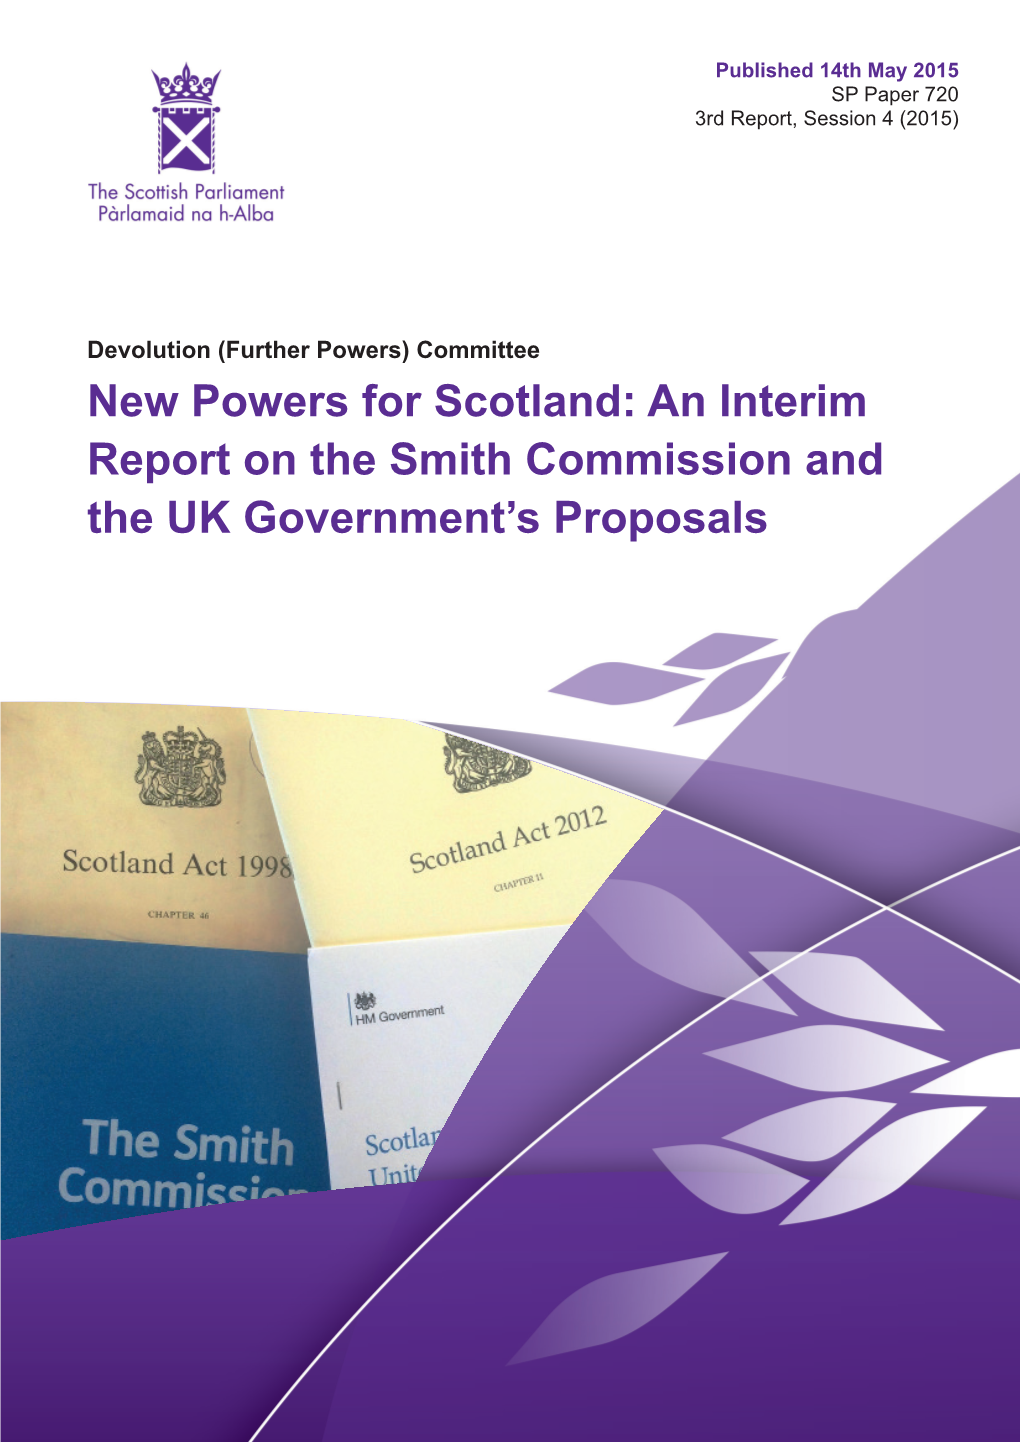 An Interim Report on the Smith Commission